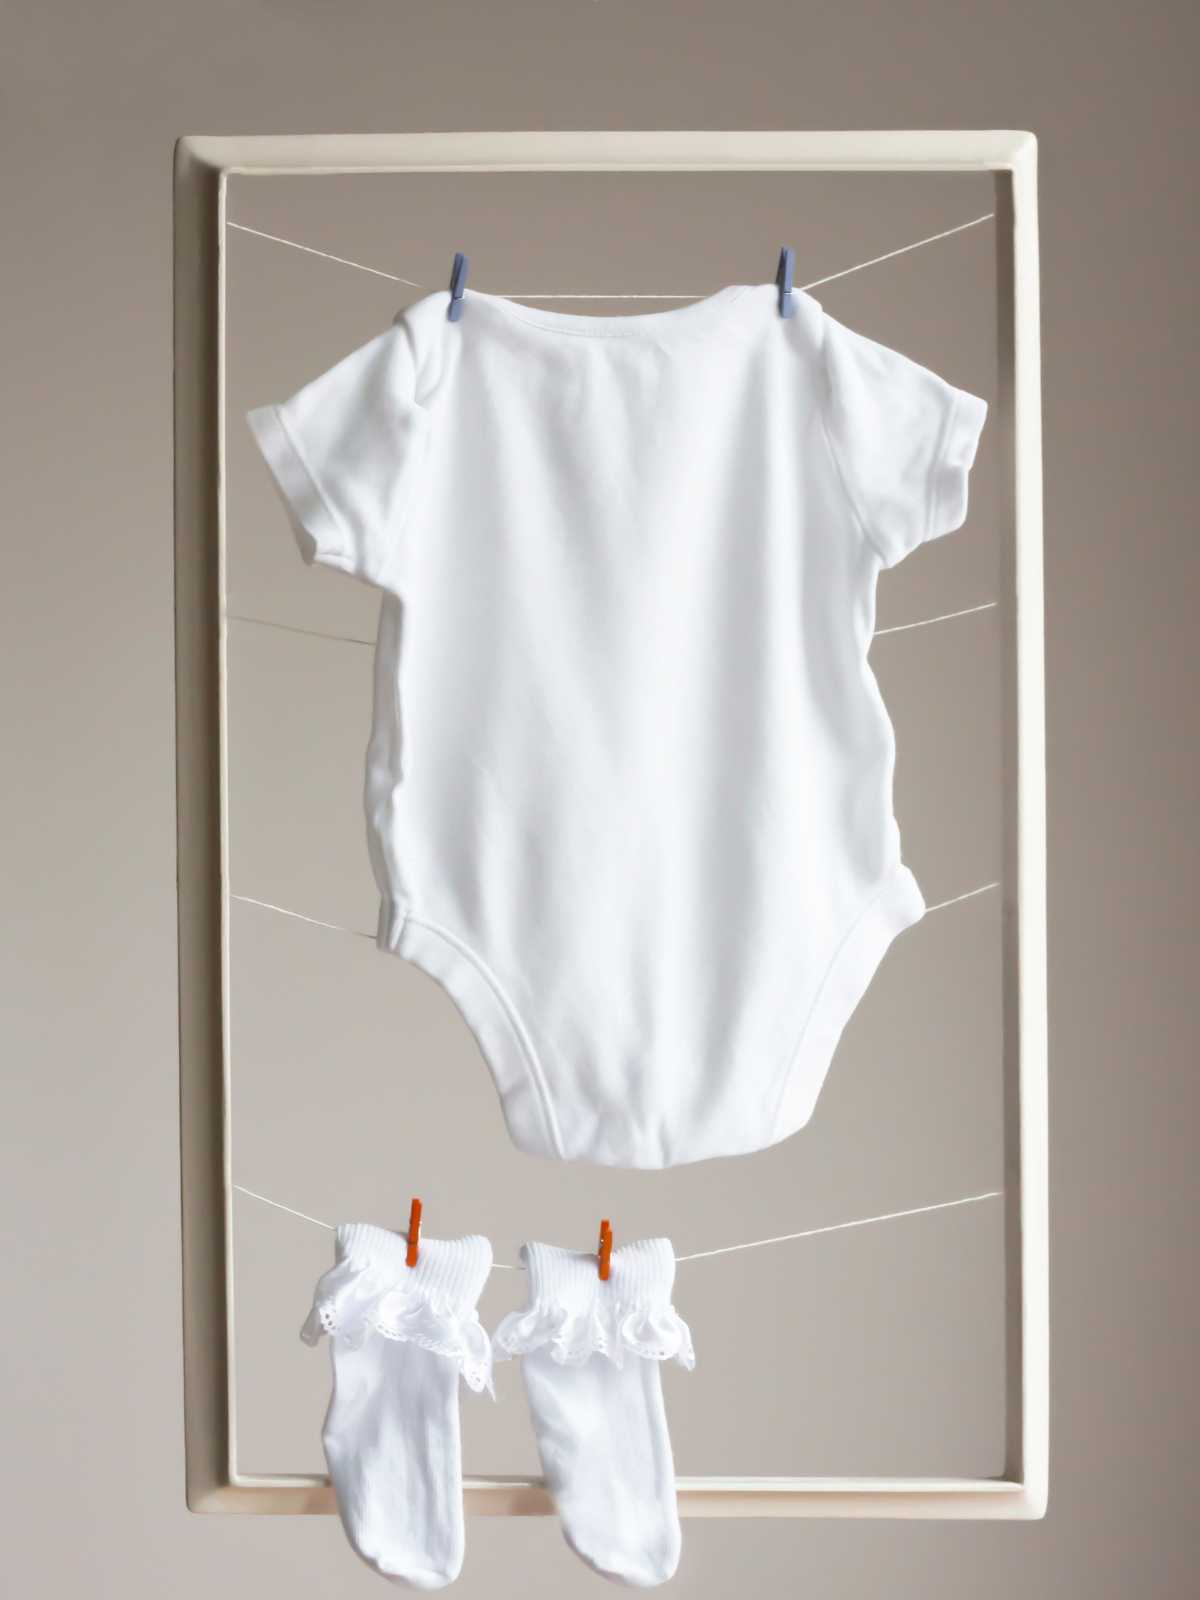 how to remove carrot stains from baby clothes 